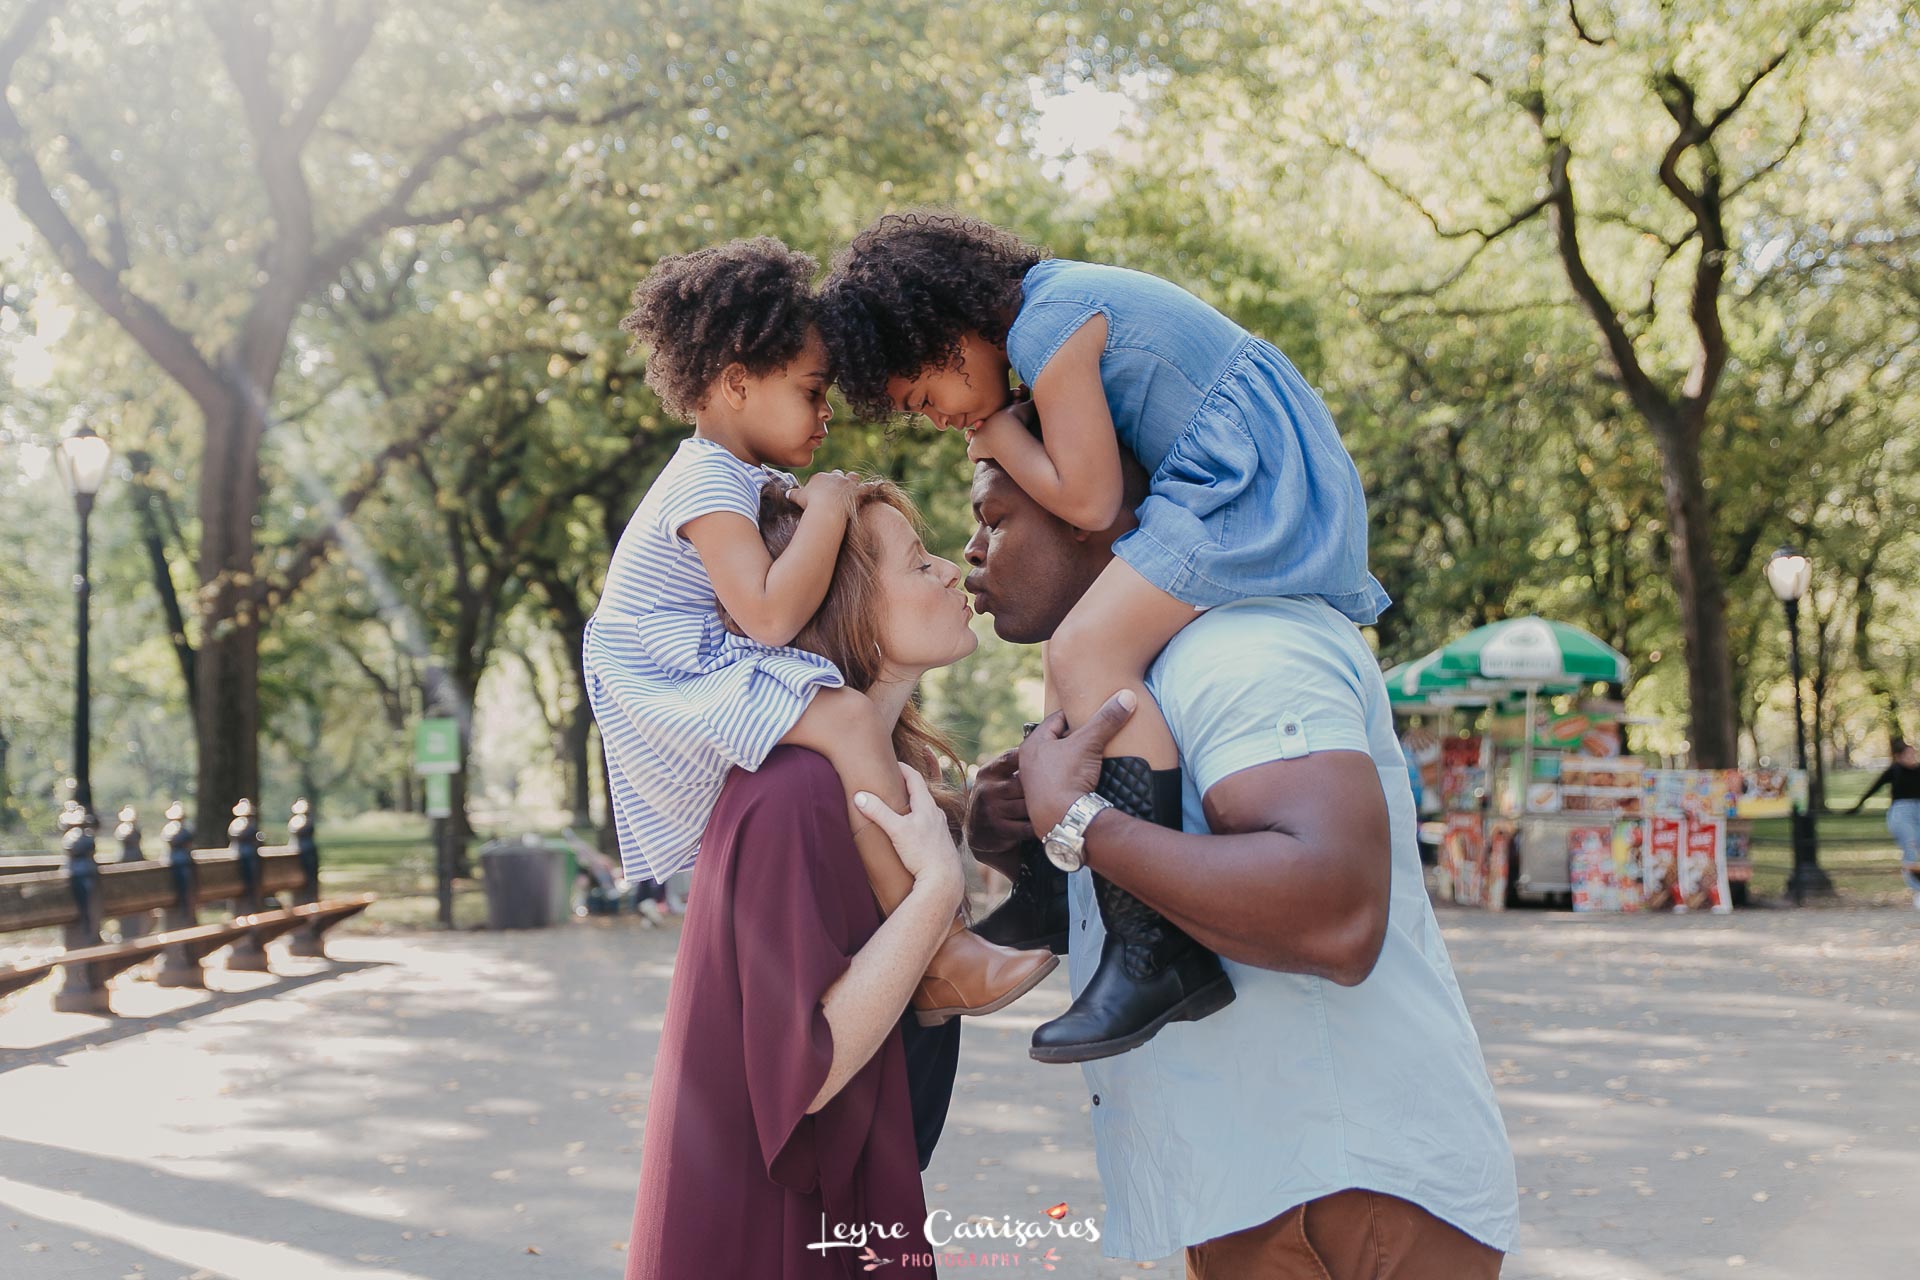 family photo shoot in The Mall, central park, nyc